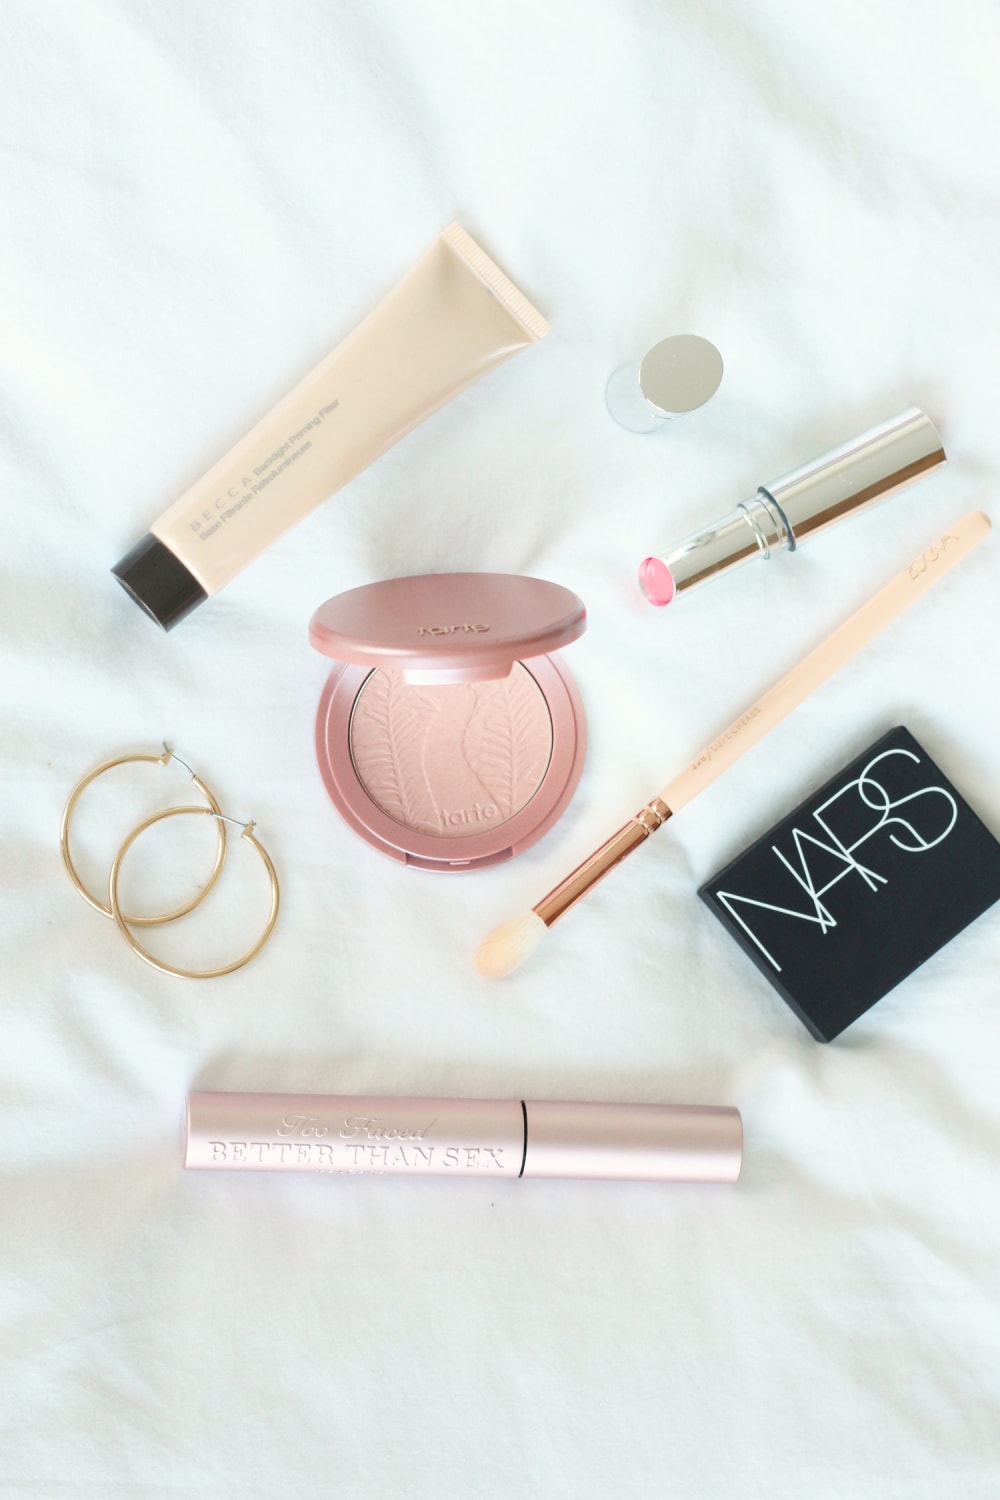 My Most Used Makeup & Skin Care Products This Autumn